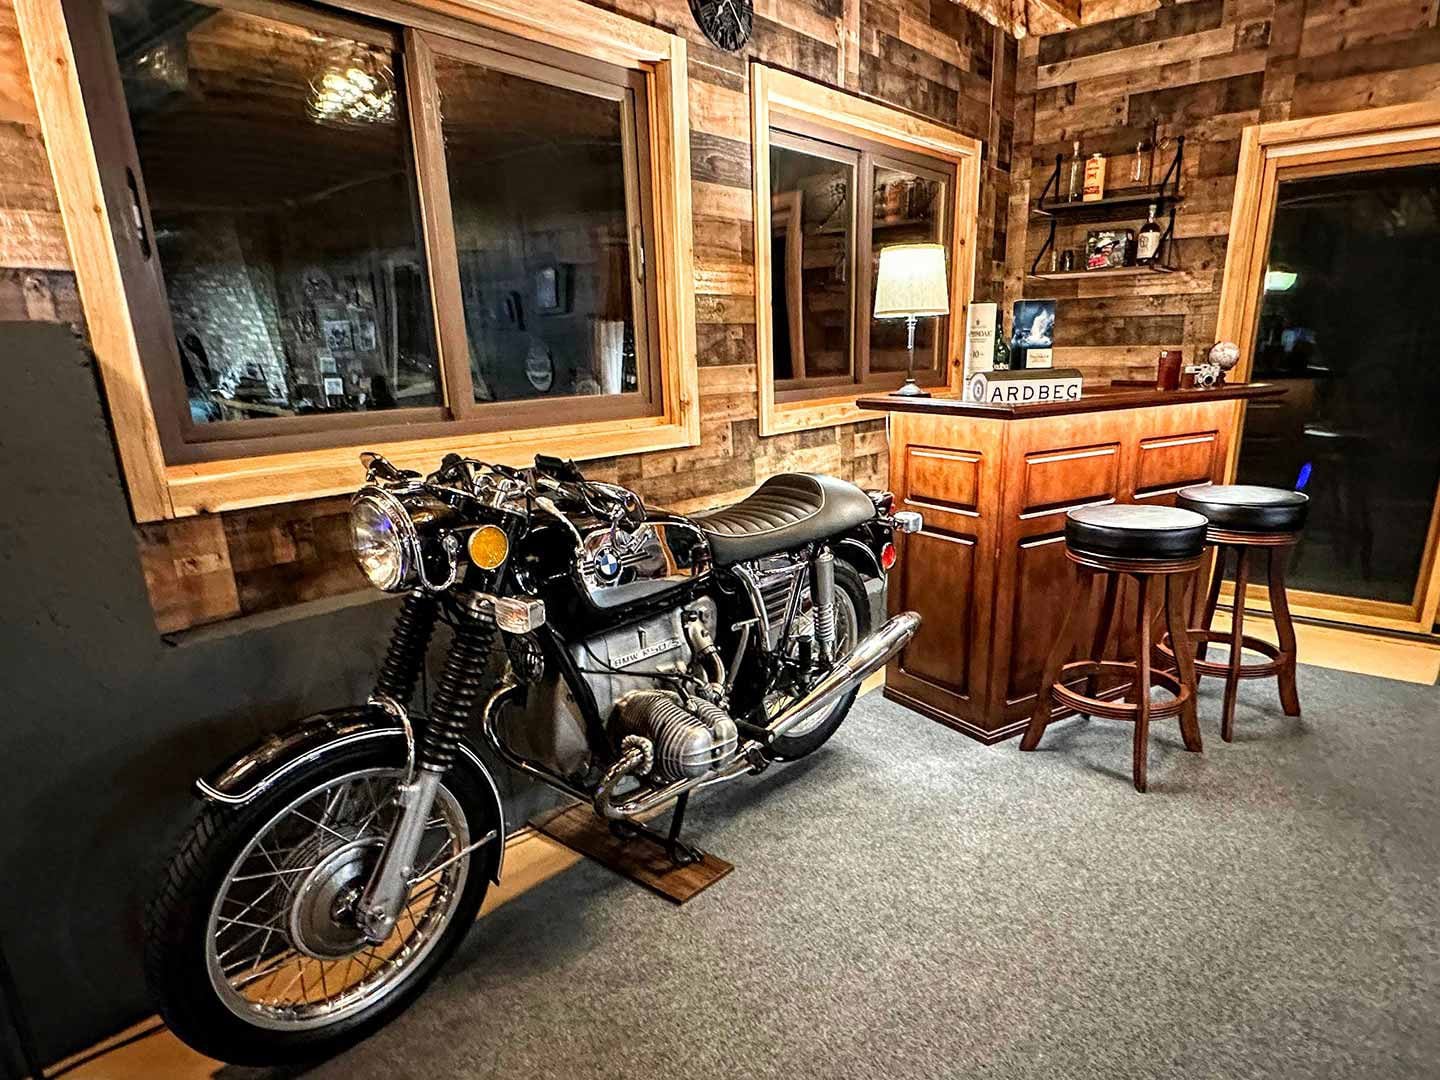 Nathan Hill’s BMW R50/5 holds court at his cozy basement bar.